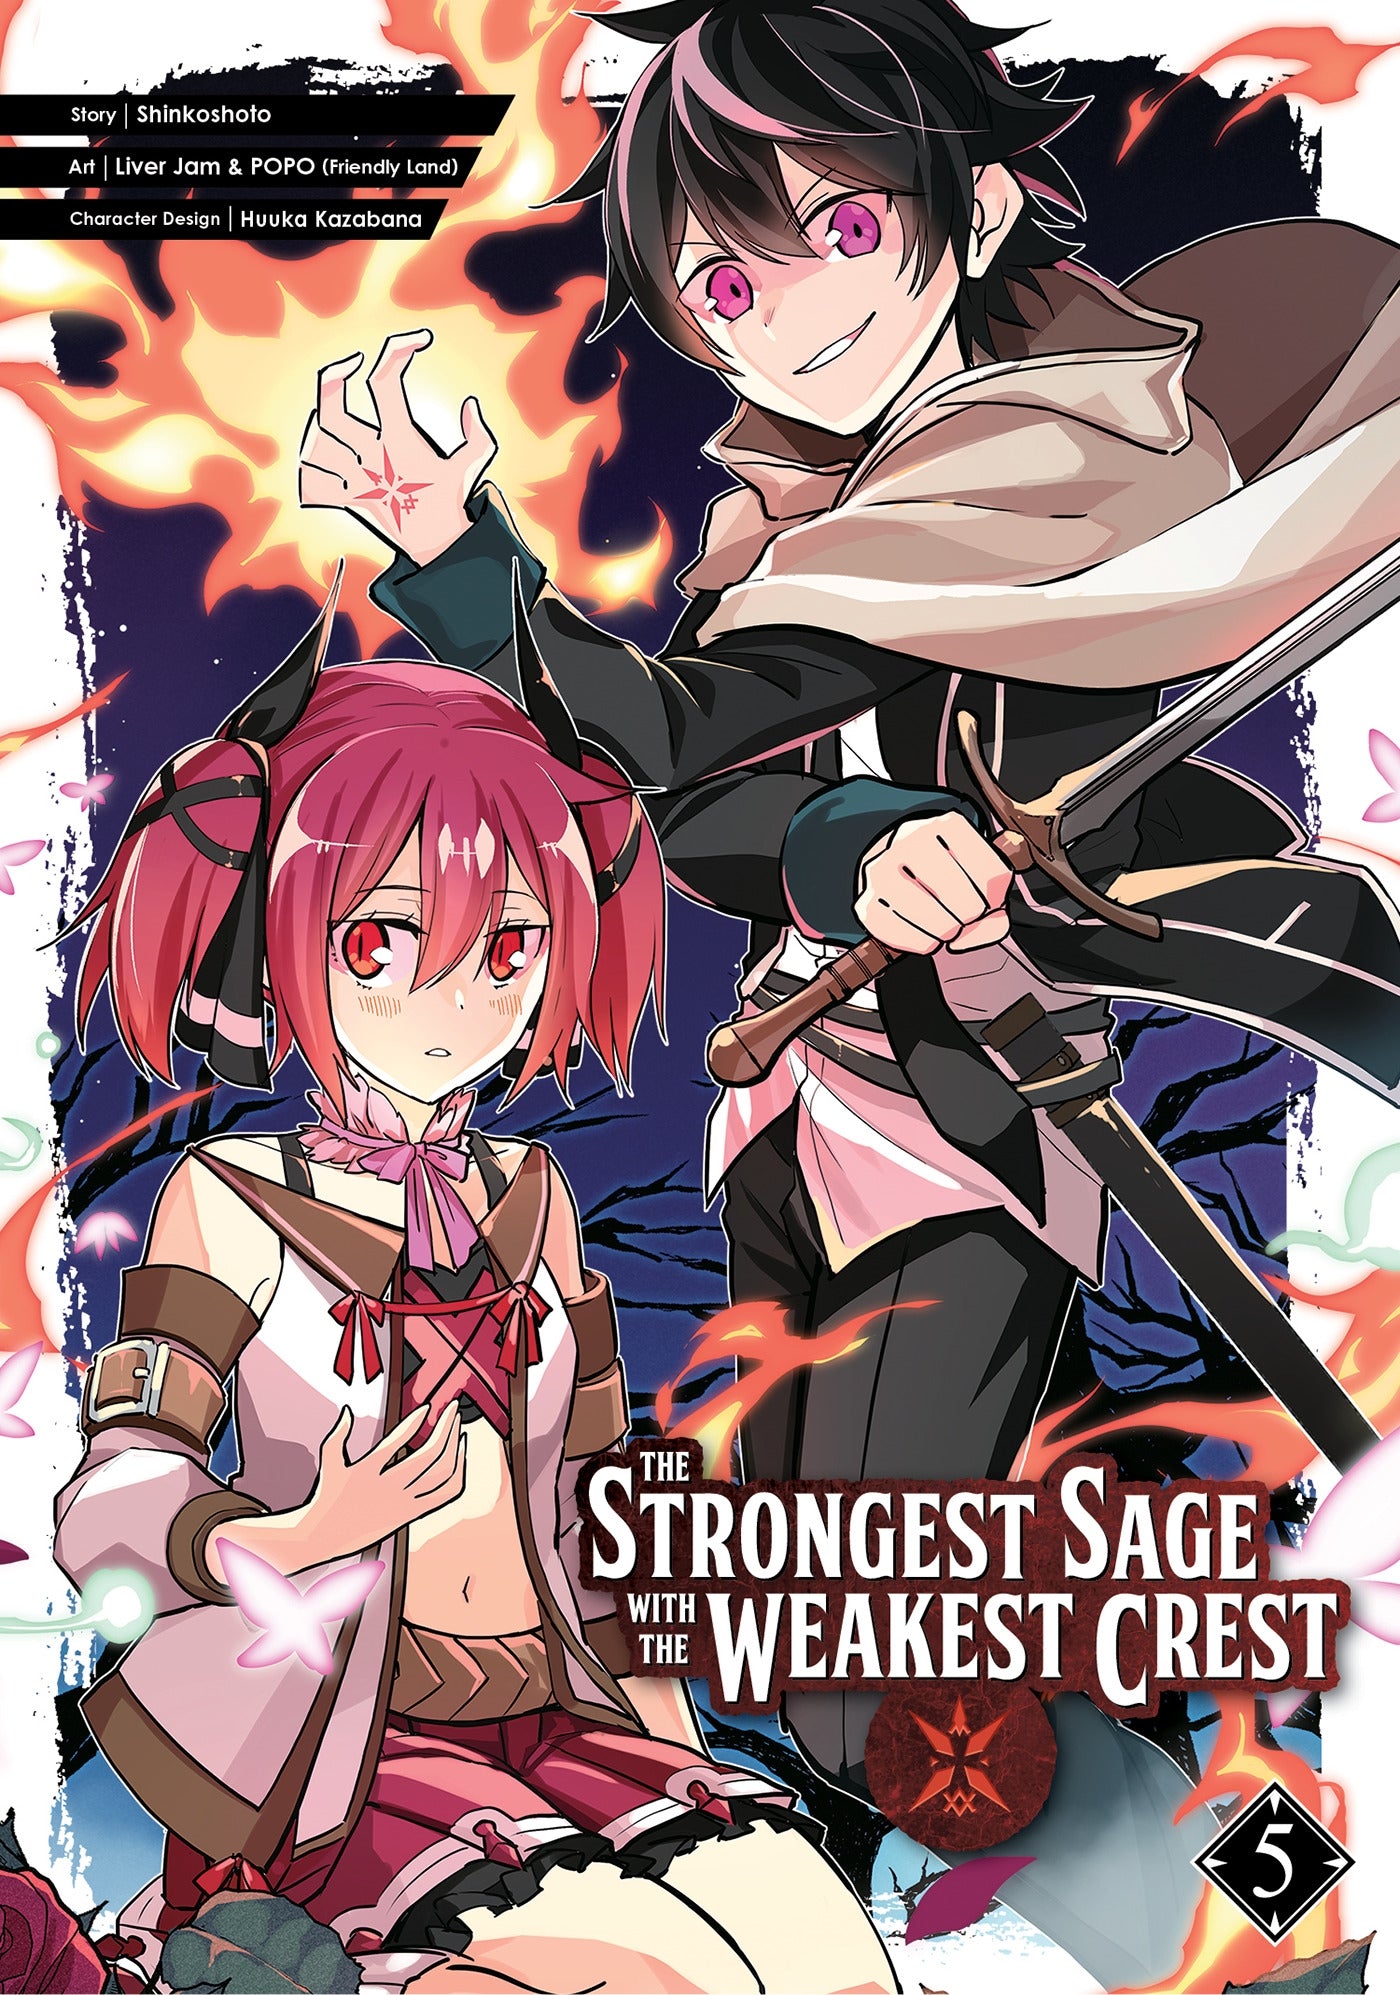 The Strongest Sage with the Weakest Crest 05 - Manga Warehouse